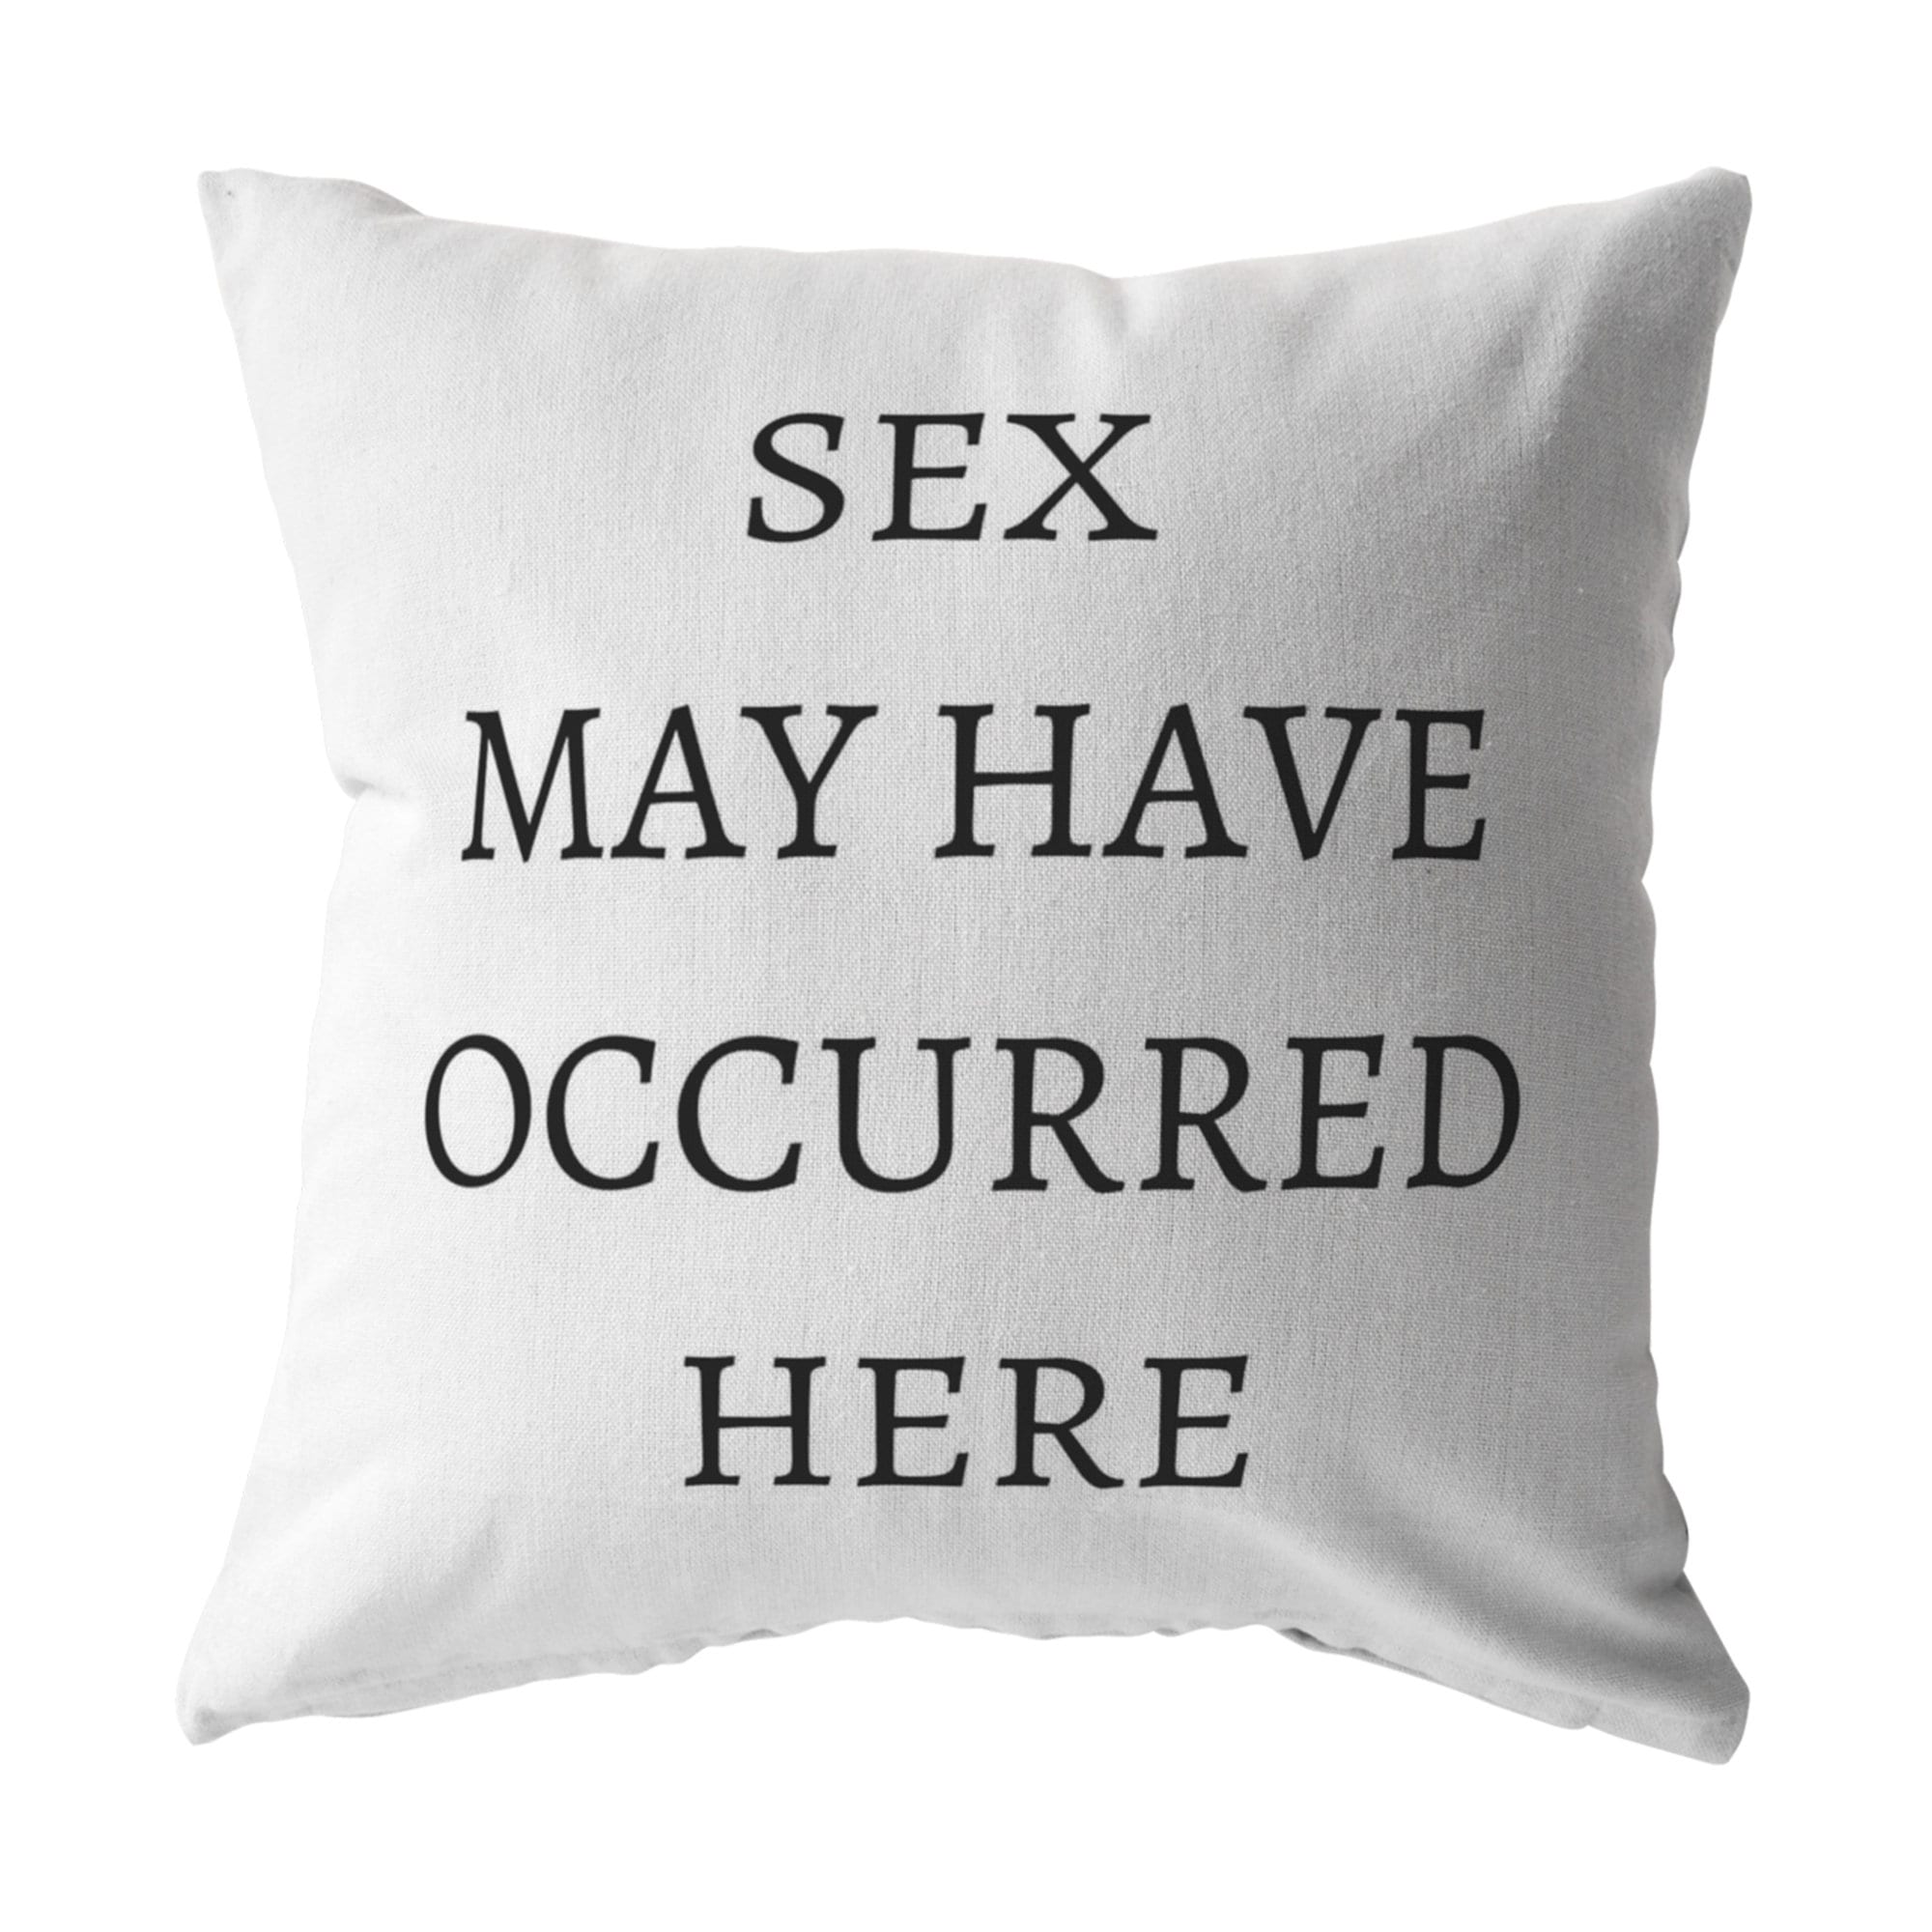 Funny Throw Pillow Sex May Have Occurred Here Funny Couch Etsy